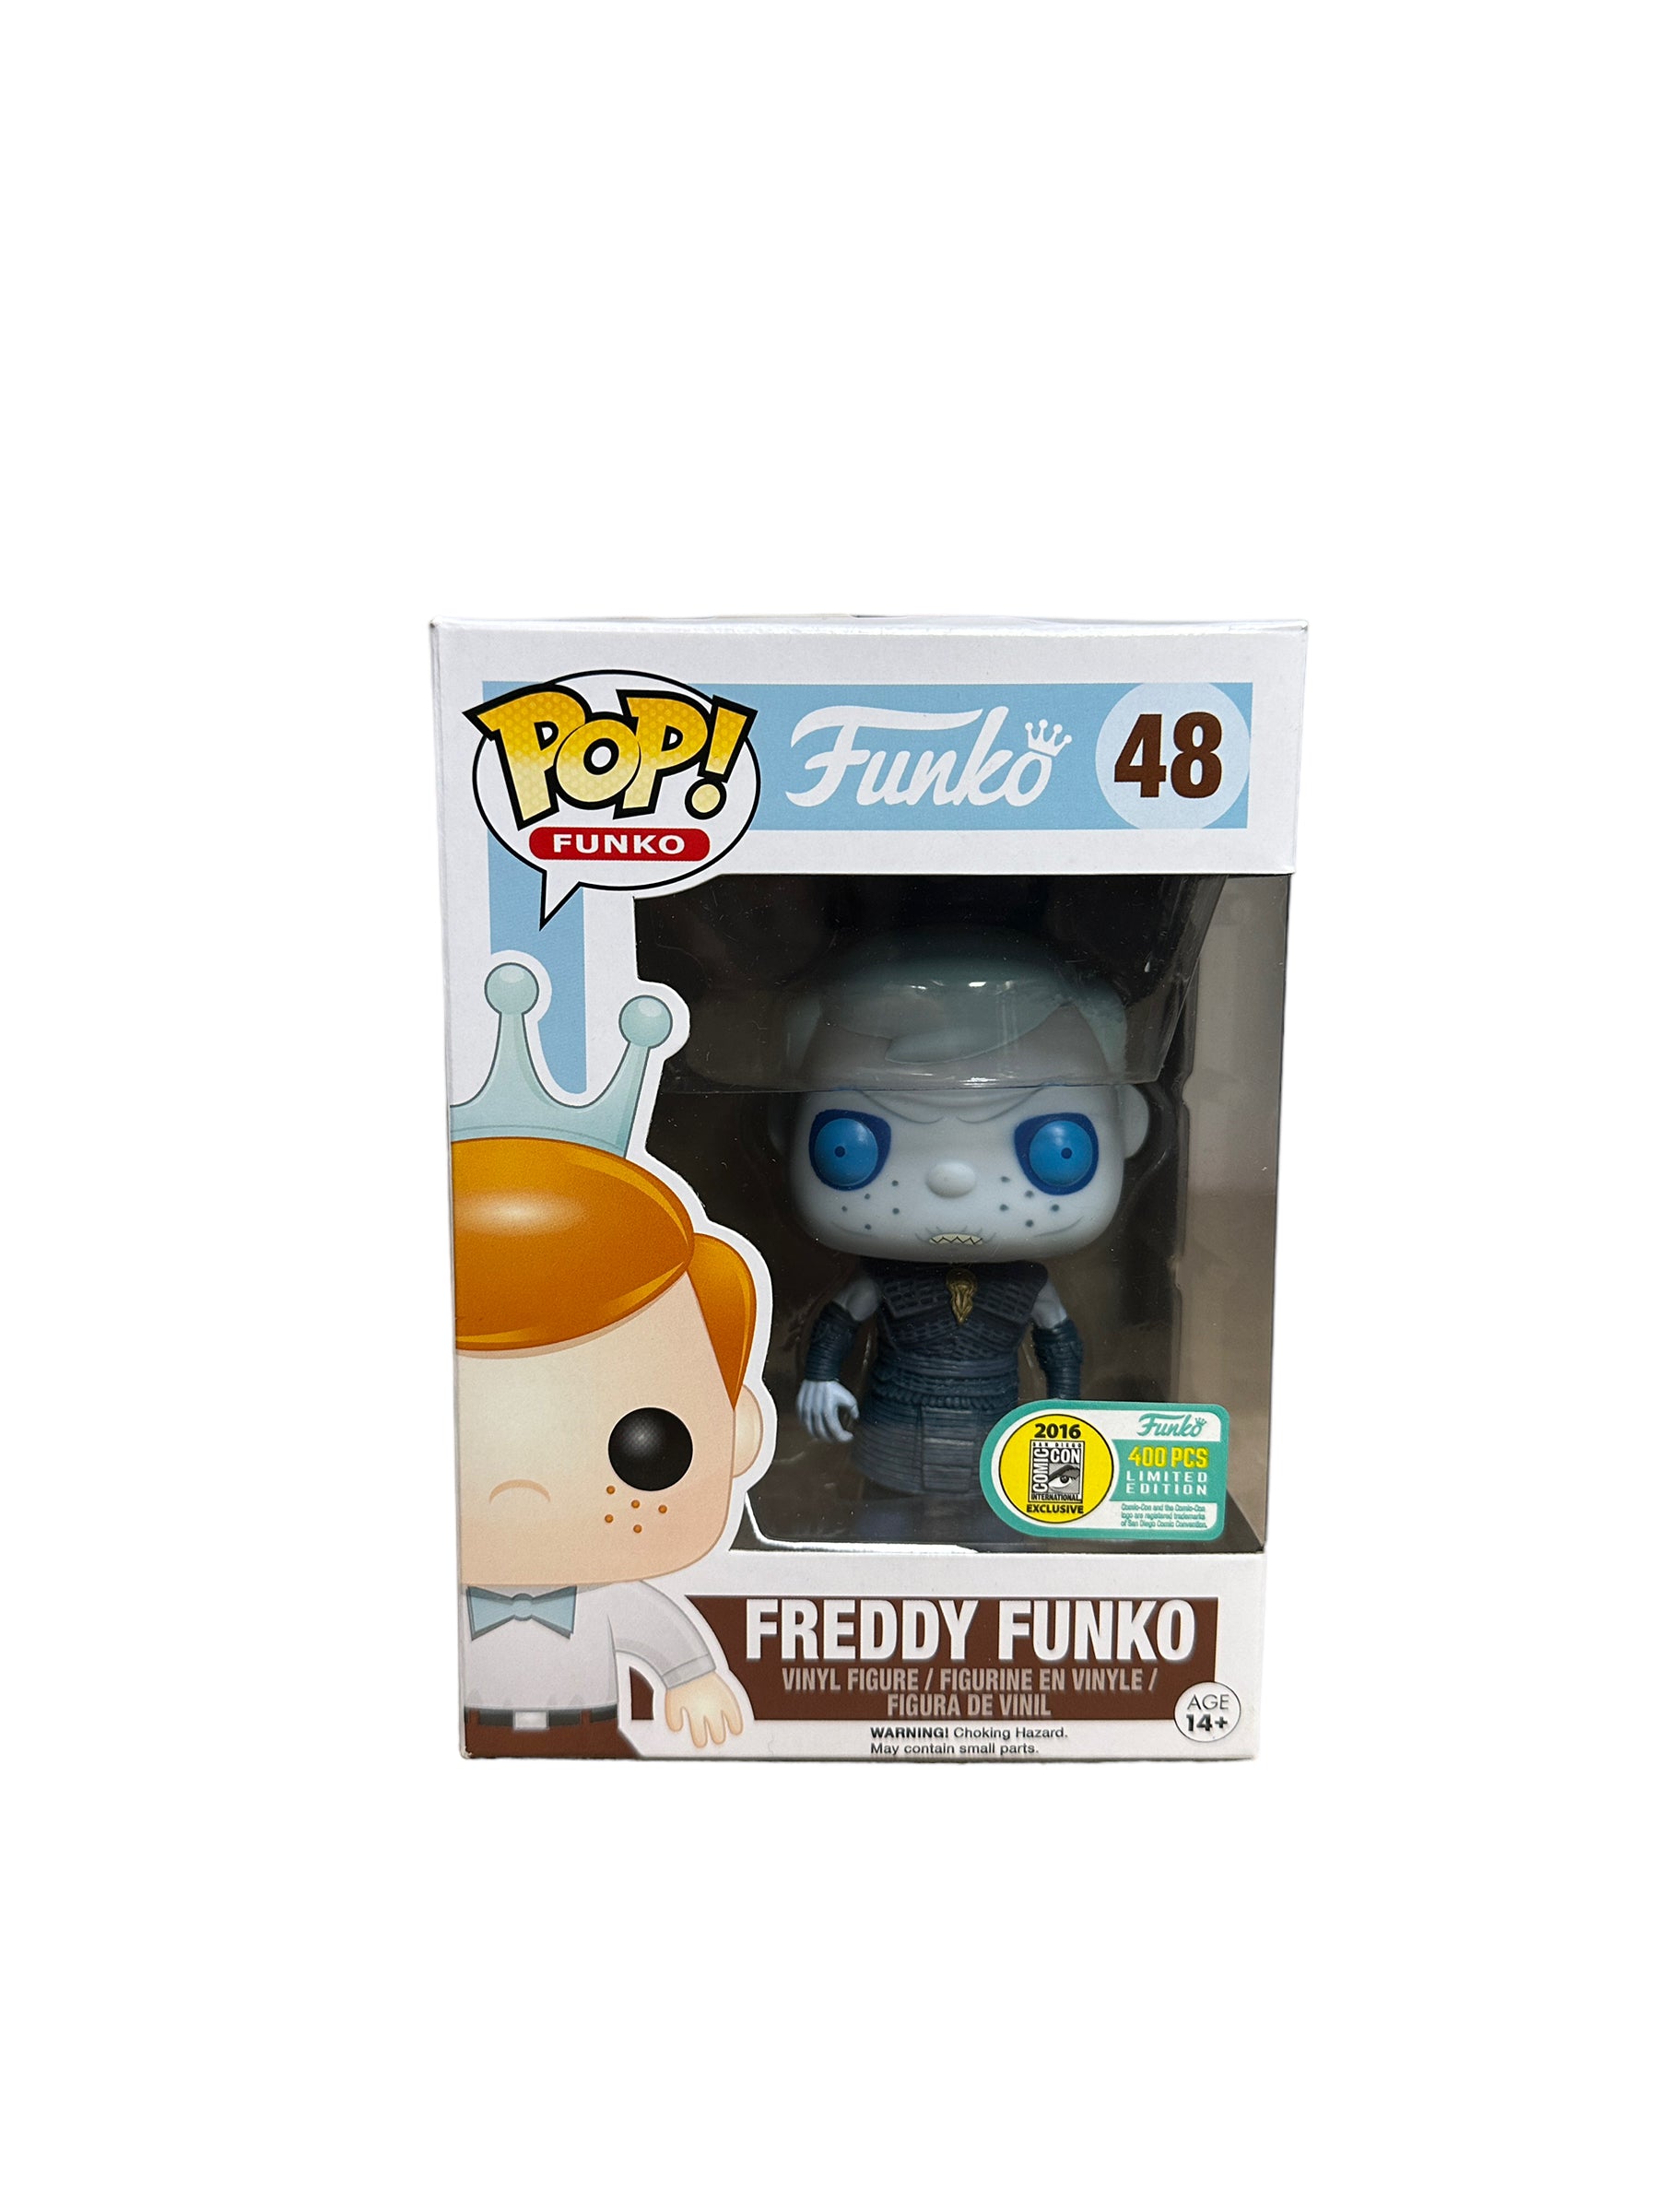 Freddy Funko as The Night King #48 Funko Pop! - Game of Thrones - SDCC 2016 Exclusive LE400 Pcs - Condition 7.5/10